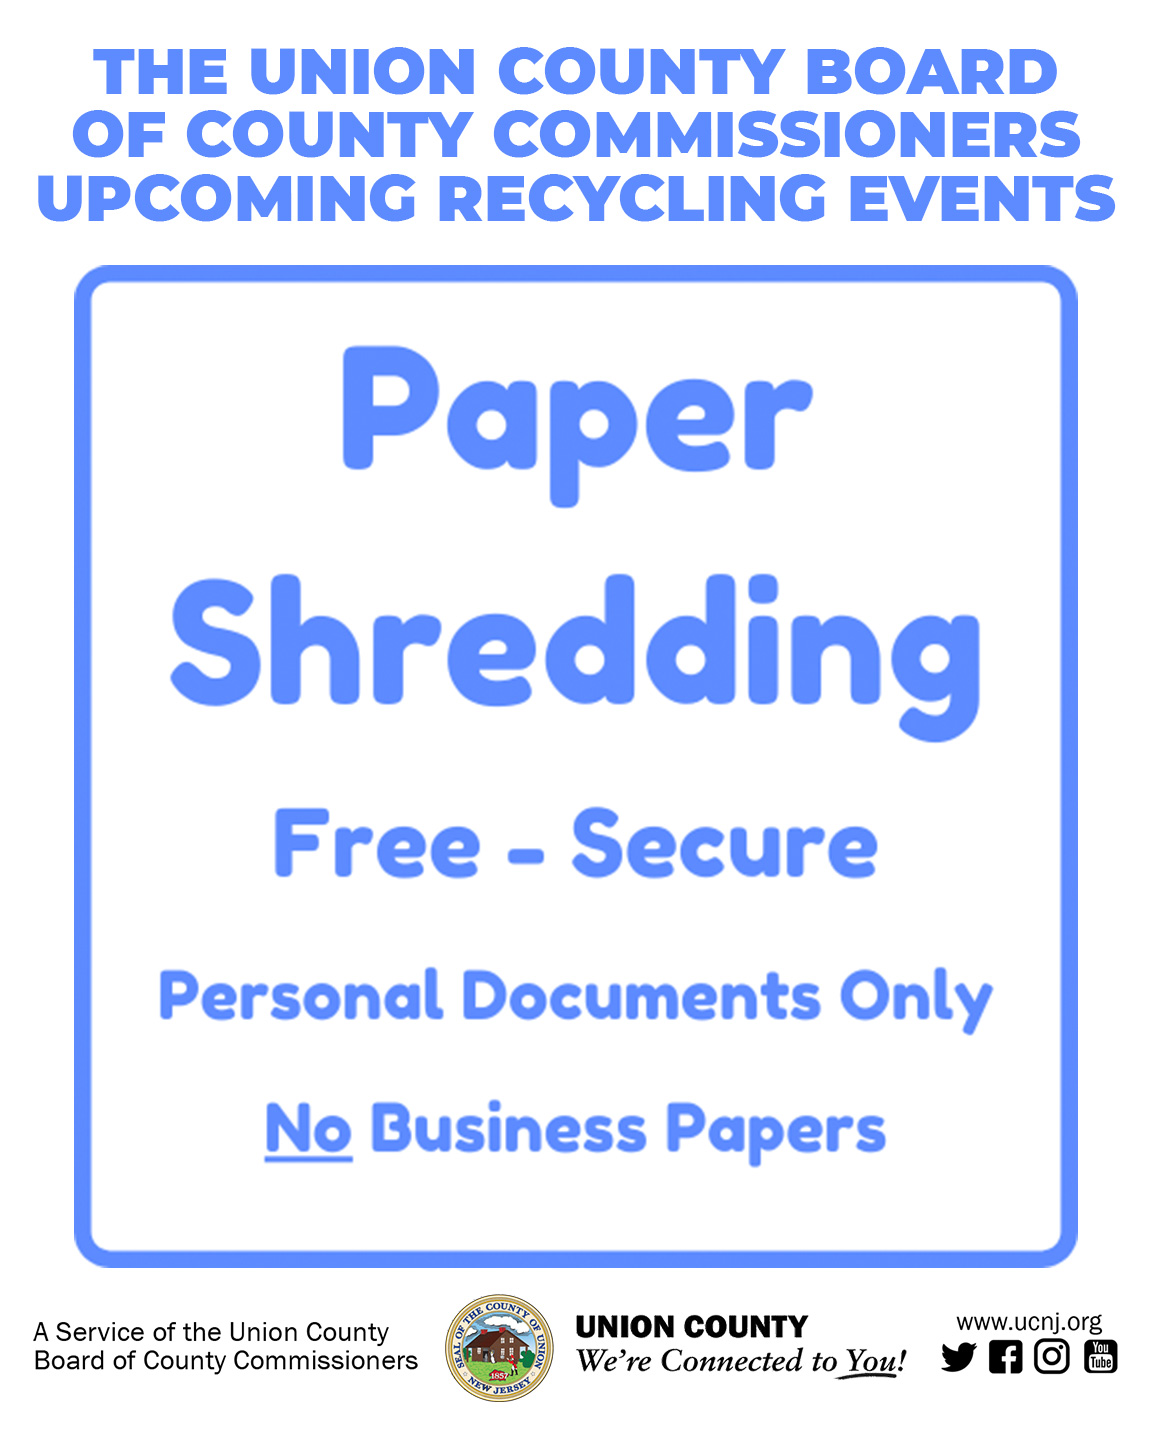 Union County Offers Free, Secure Shredding for Personal Documents in